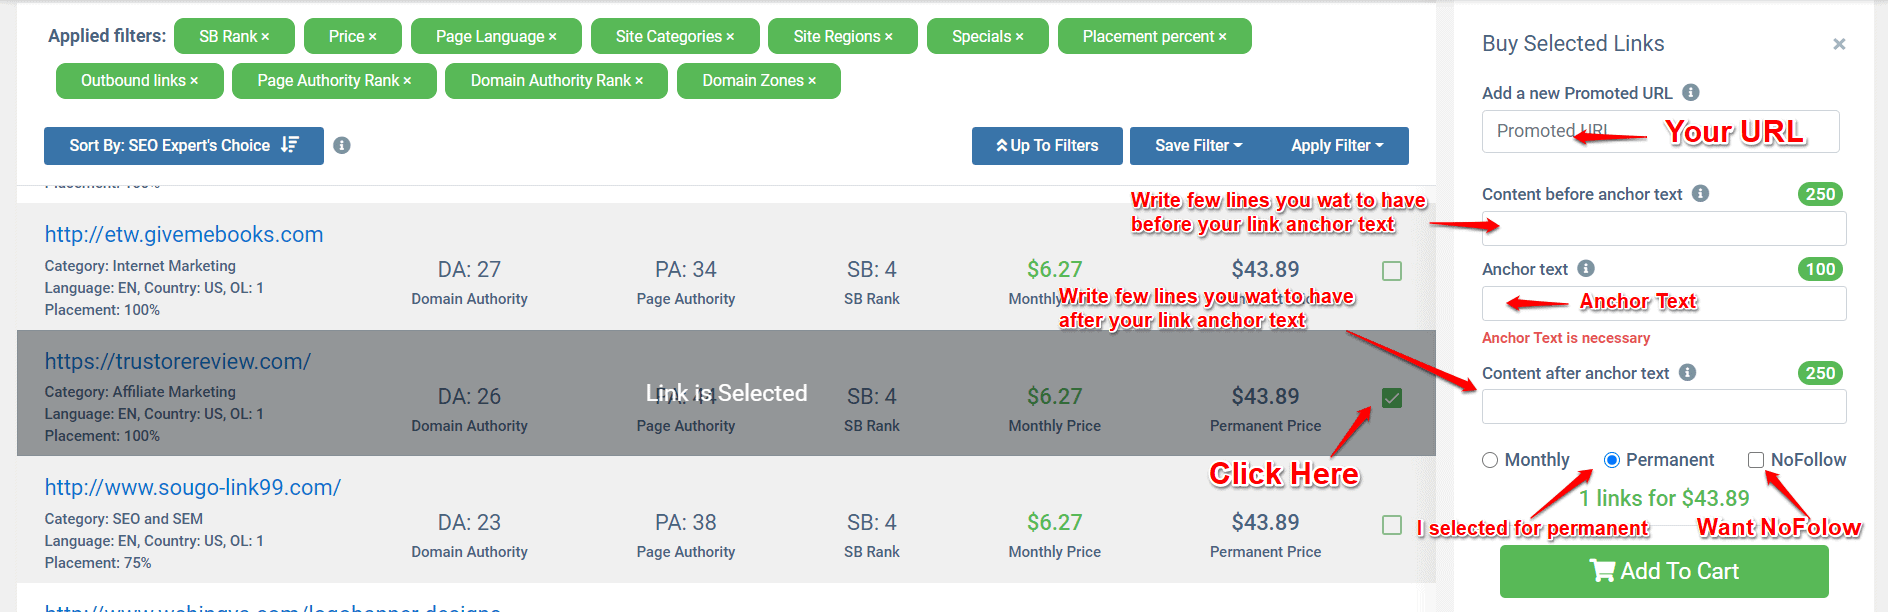 Buy Backlinks and palce order in linksmanagement